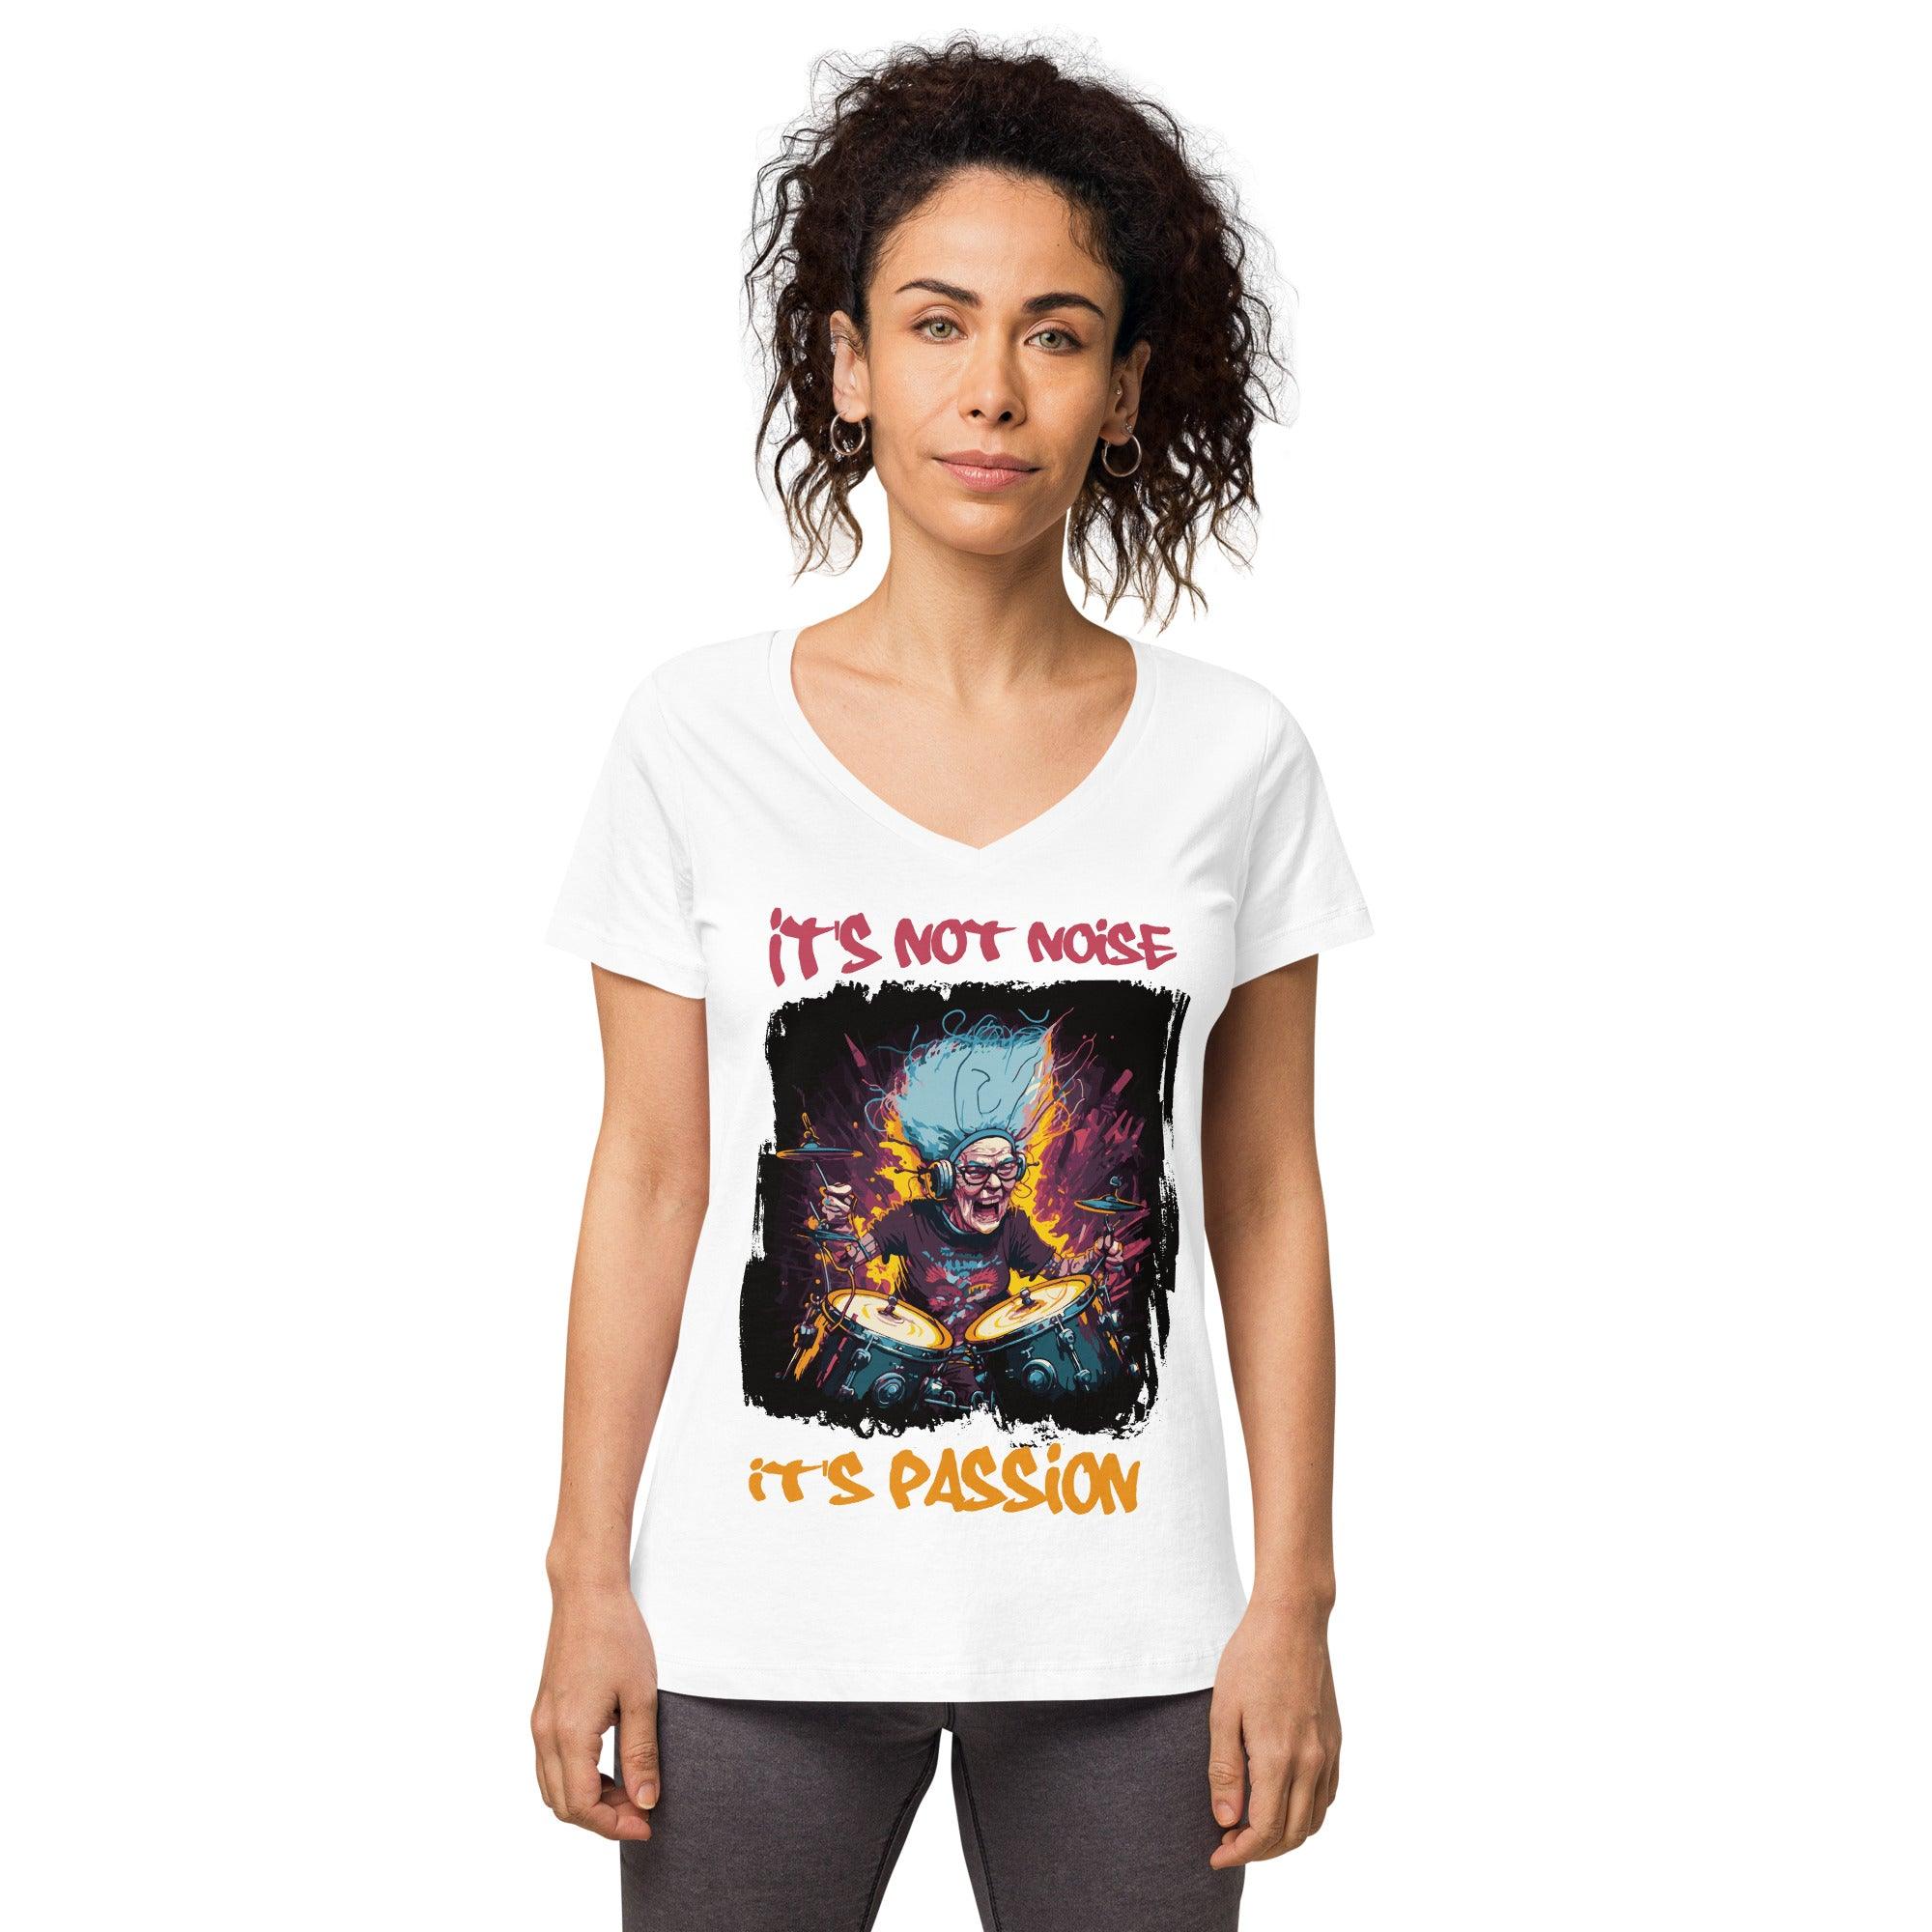 It's passion women’s fitted v-neck t-shirt - Beyond T-shirts